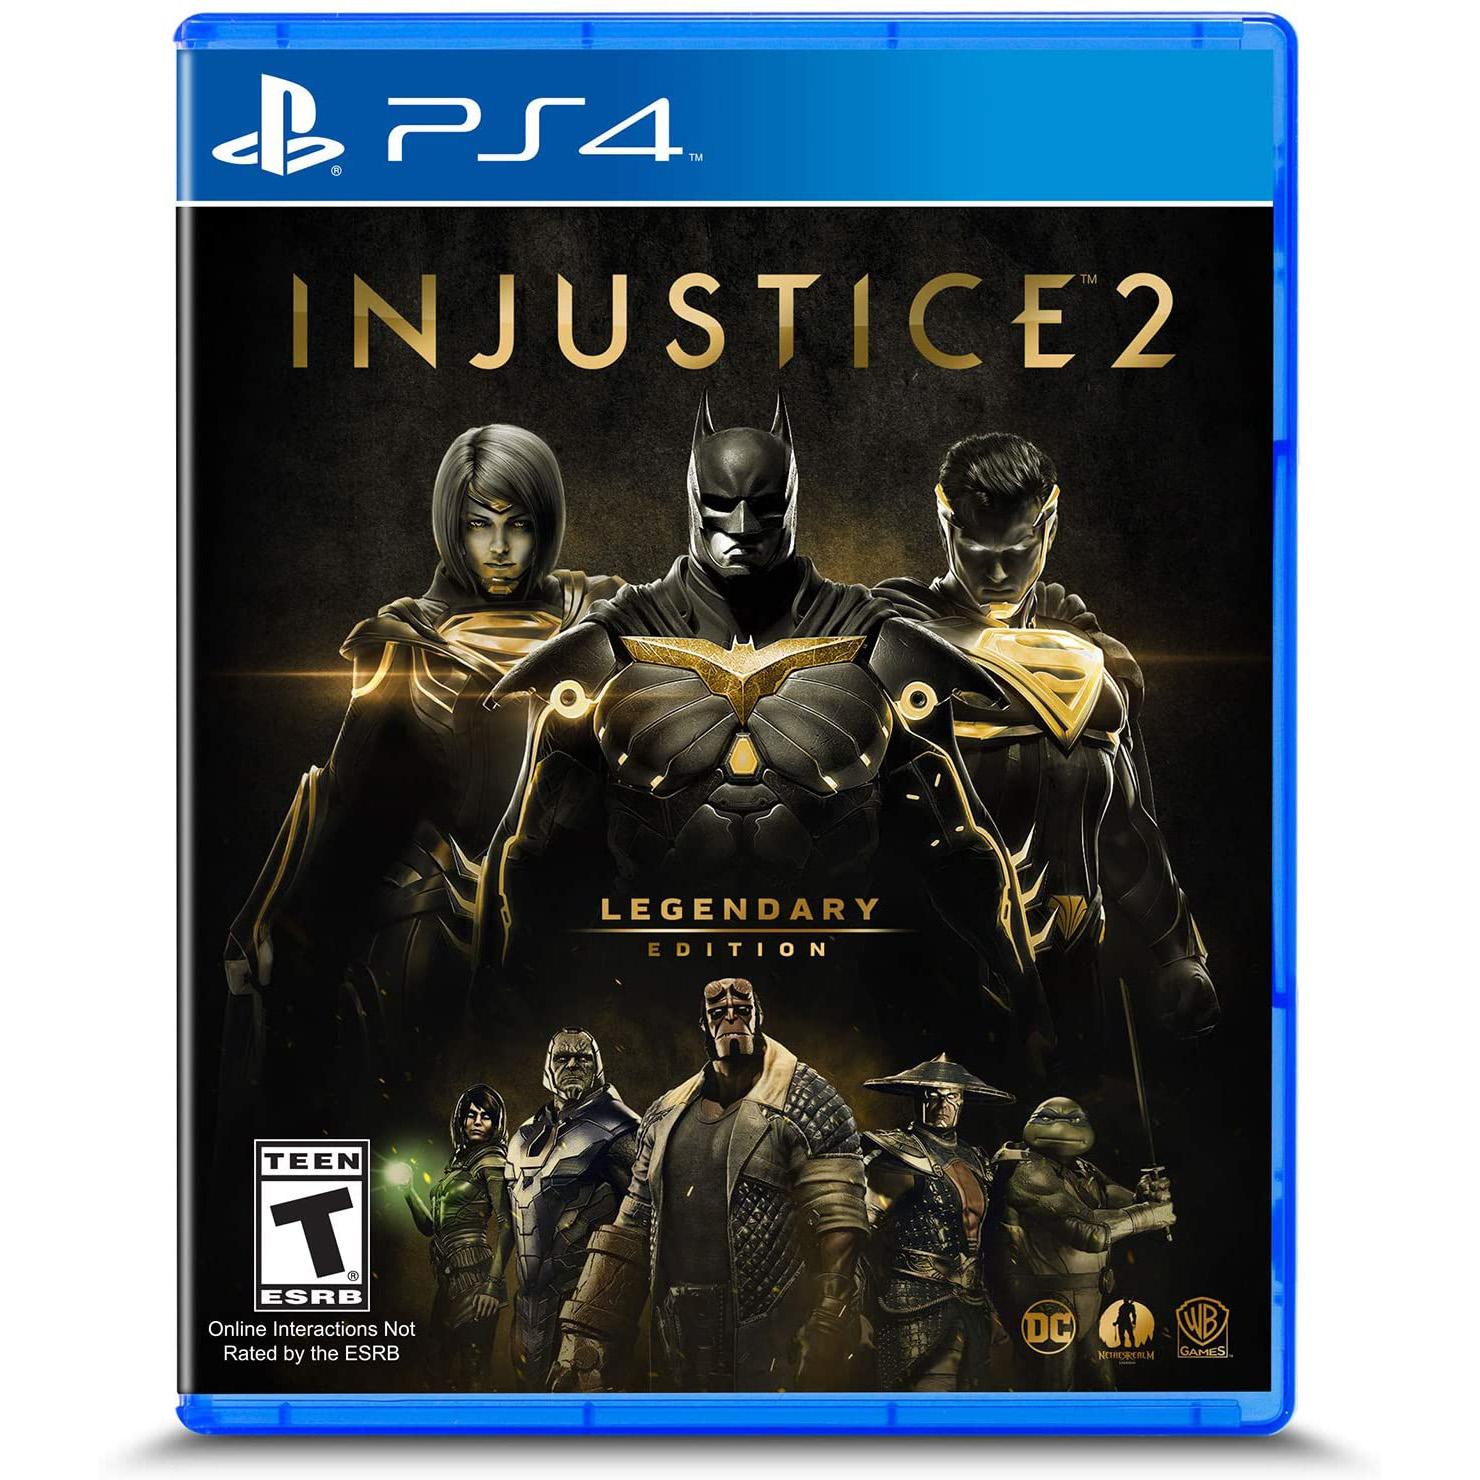 Injustice 2 Legendary Edition PS4 or Xbox One for $9.99